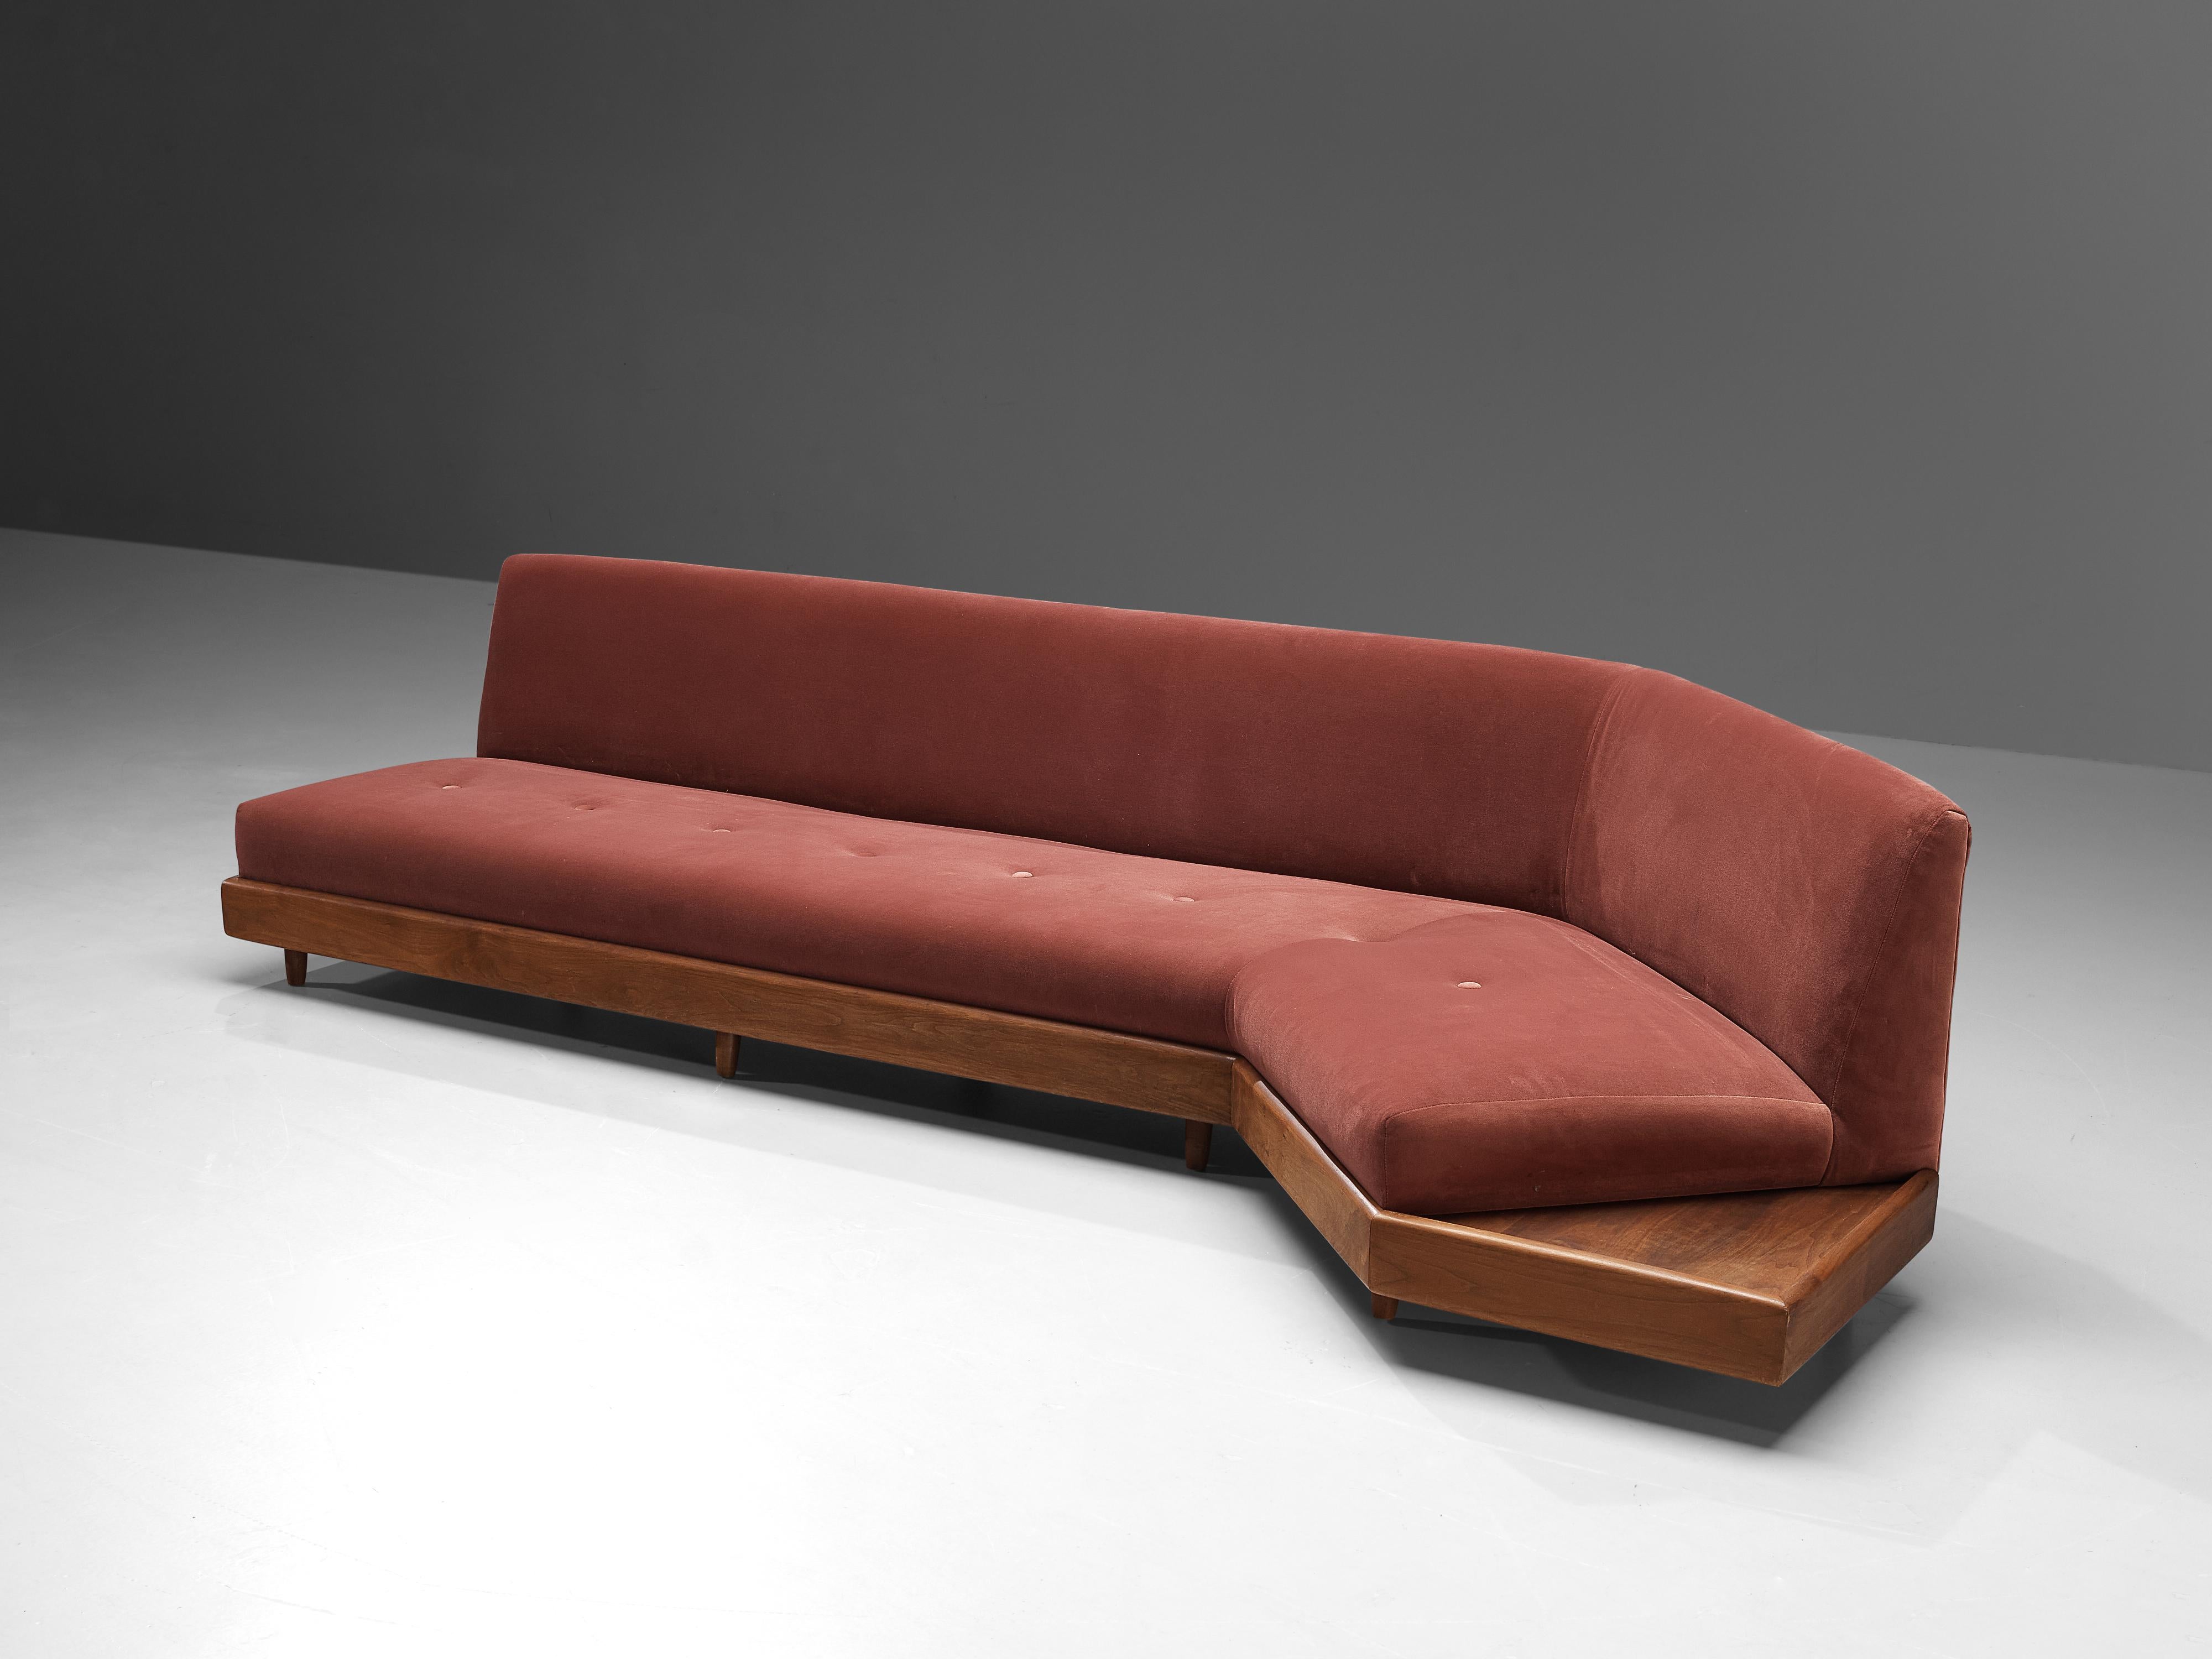 Adrian Pearsall, sofa model '1800-S', pink velvet, walnut, United States, 1960s

This classic, soft shaped sofa has a unique feel and although it is modest and simplistic it also shows stunning, delicate lines and shapes. The walnut frame balances